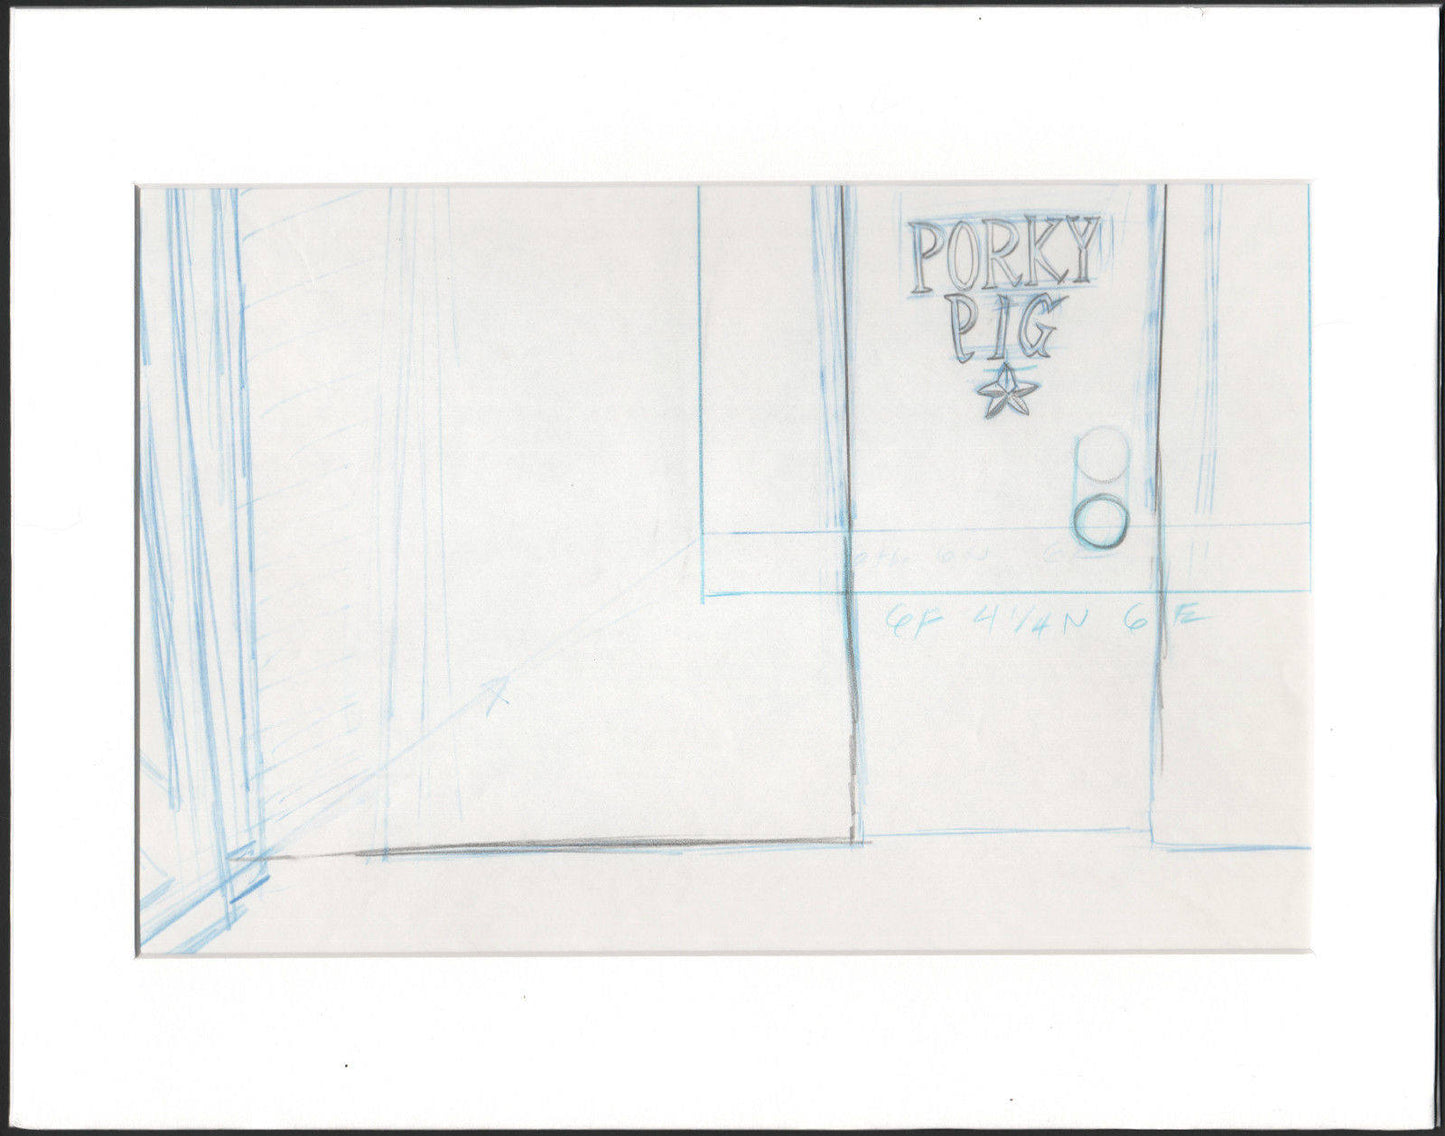 PORKY PIG Looney Tunes dressing room door production layout drawing Warners